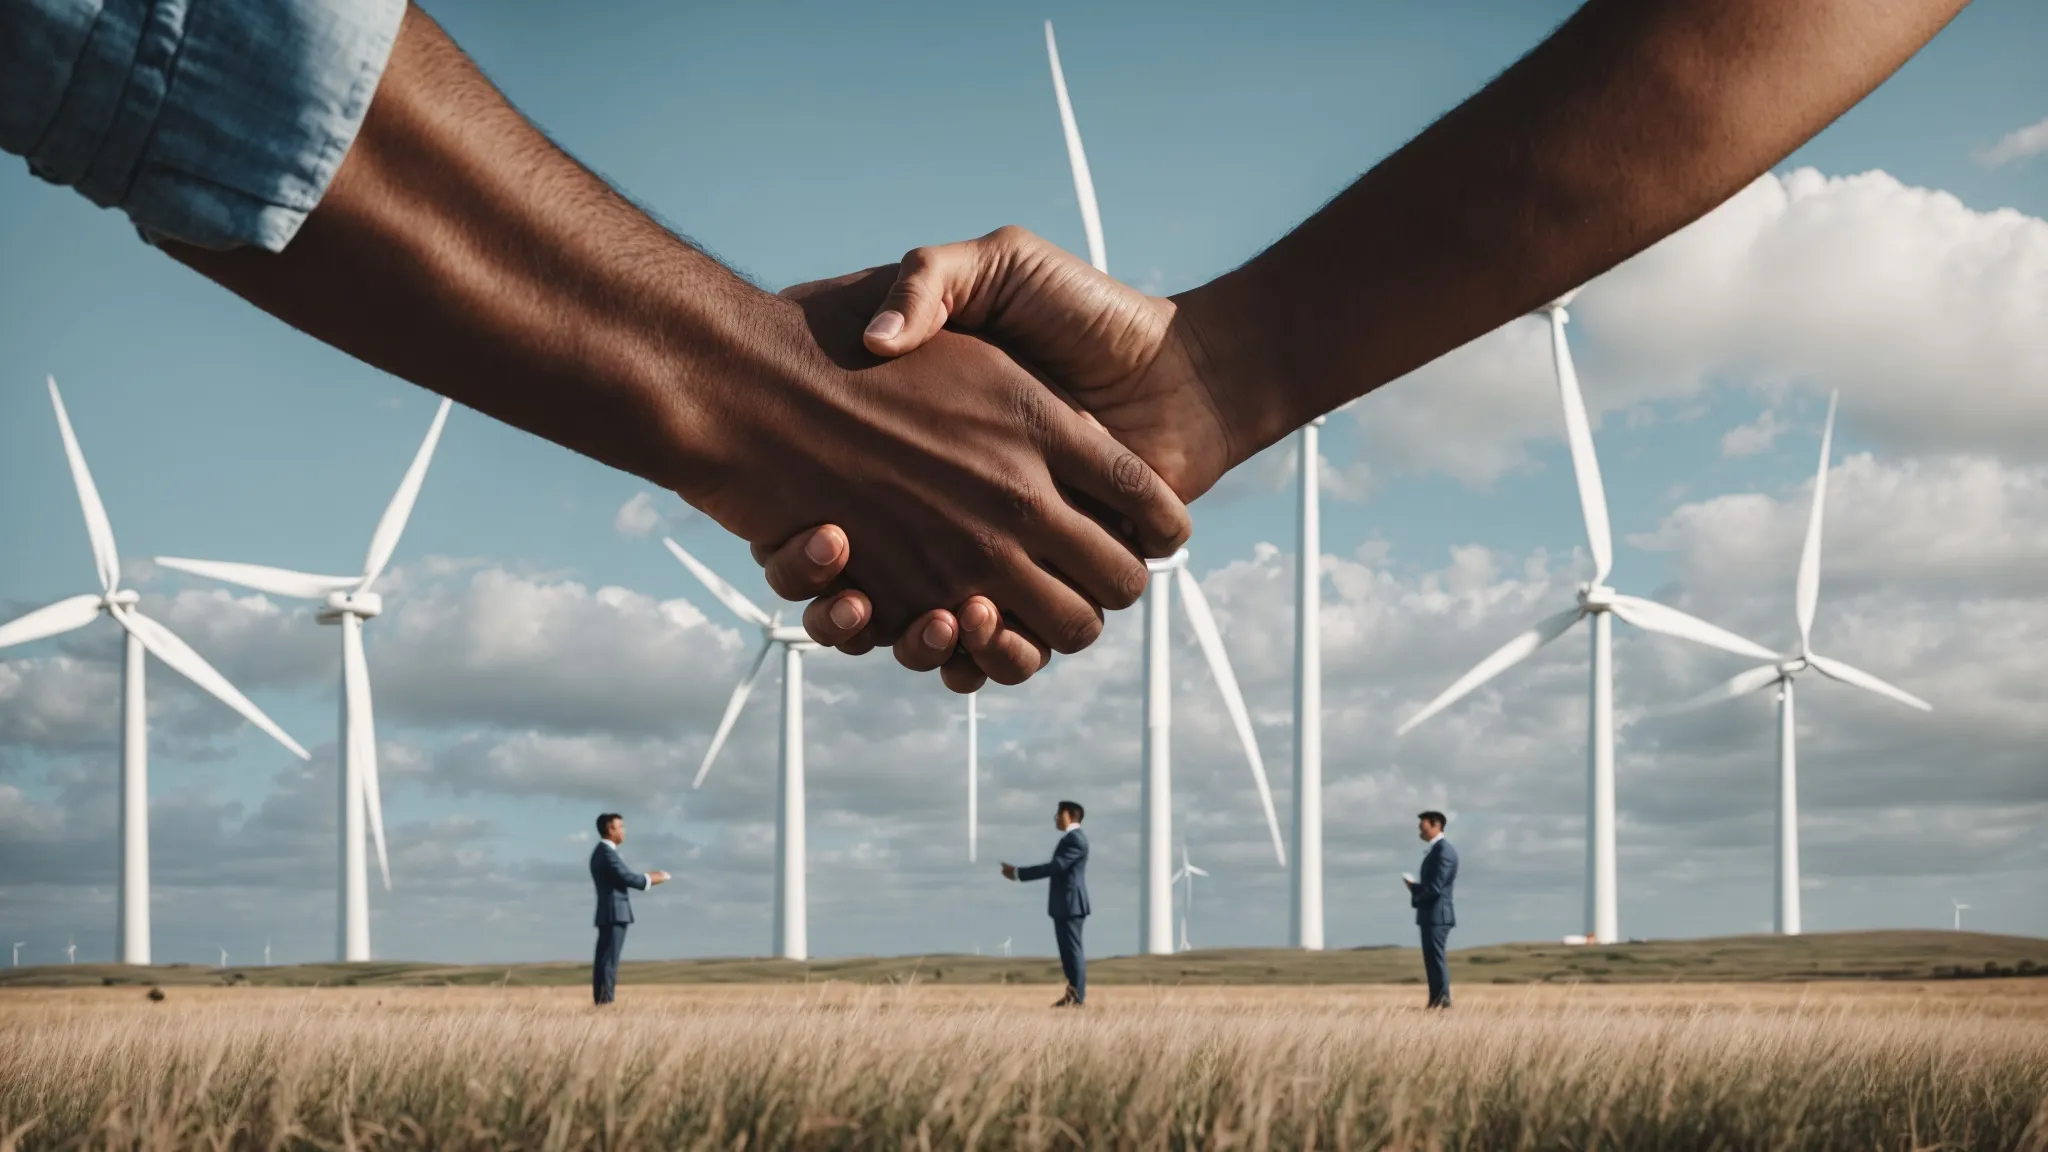 a lawyer and a client shake hands in front of a towering wind farm under a clear blue sky.